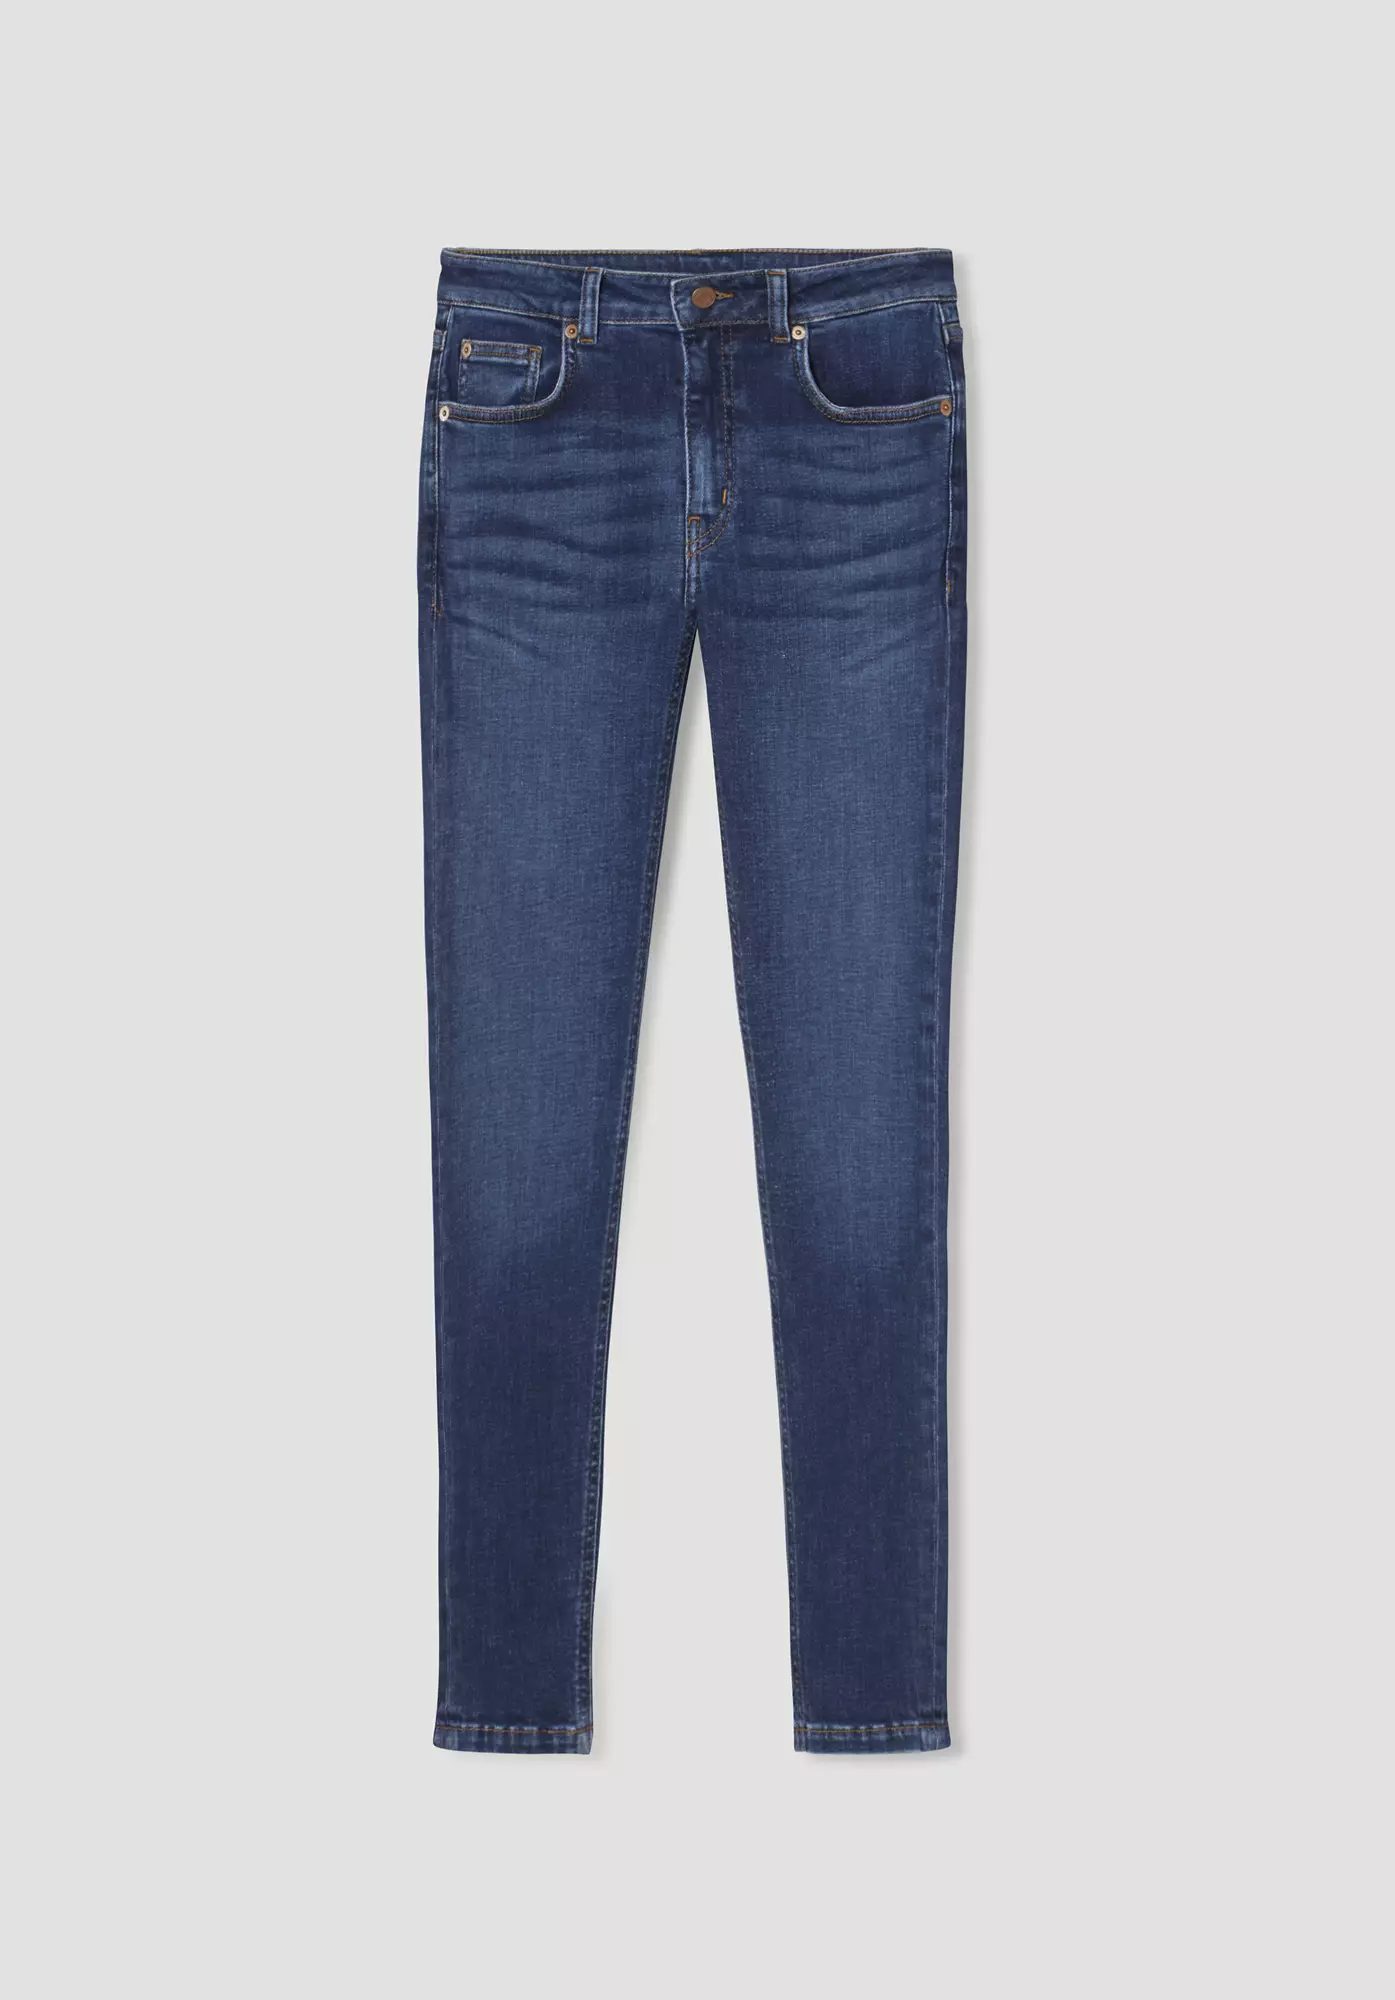 LINA Mid Rise Skinny jeans made from organic denim - 4